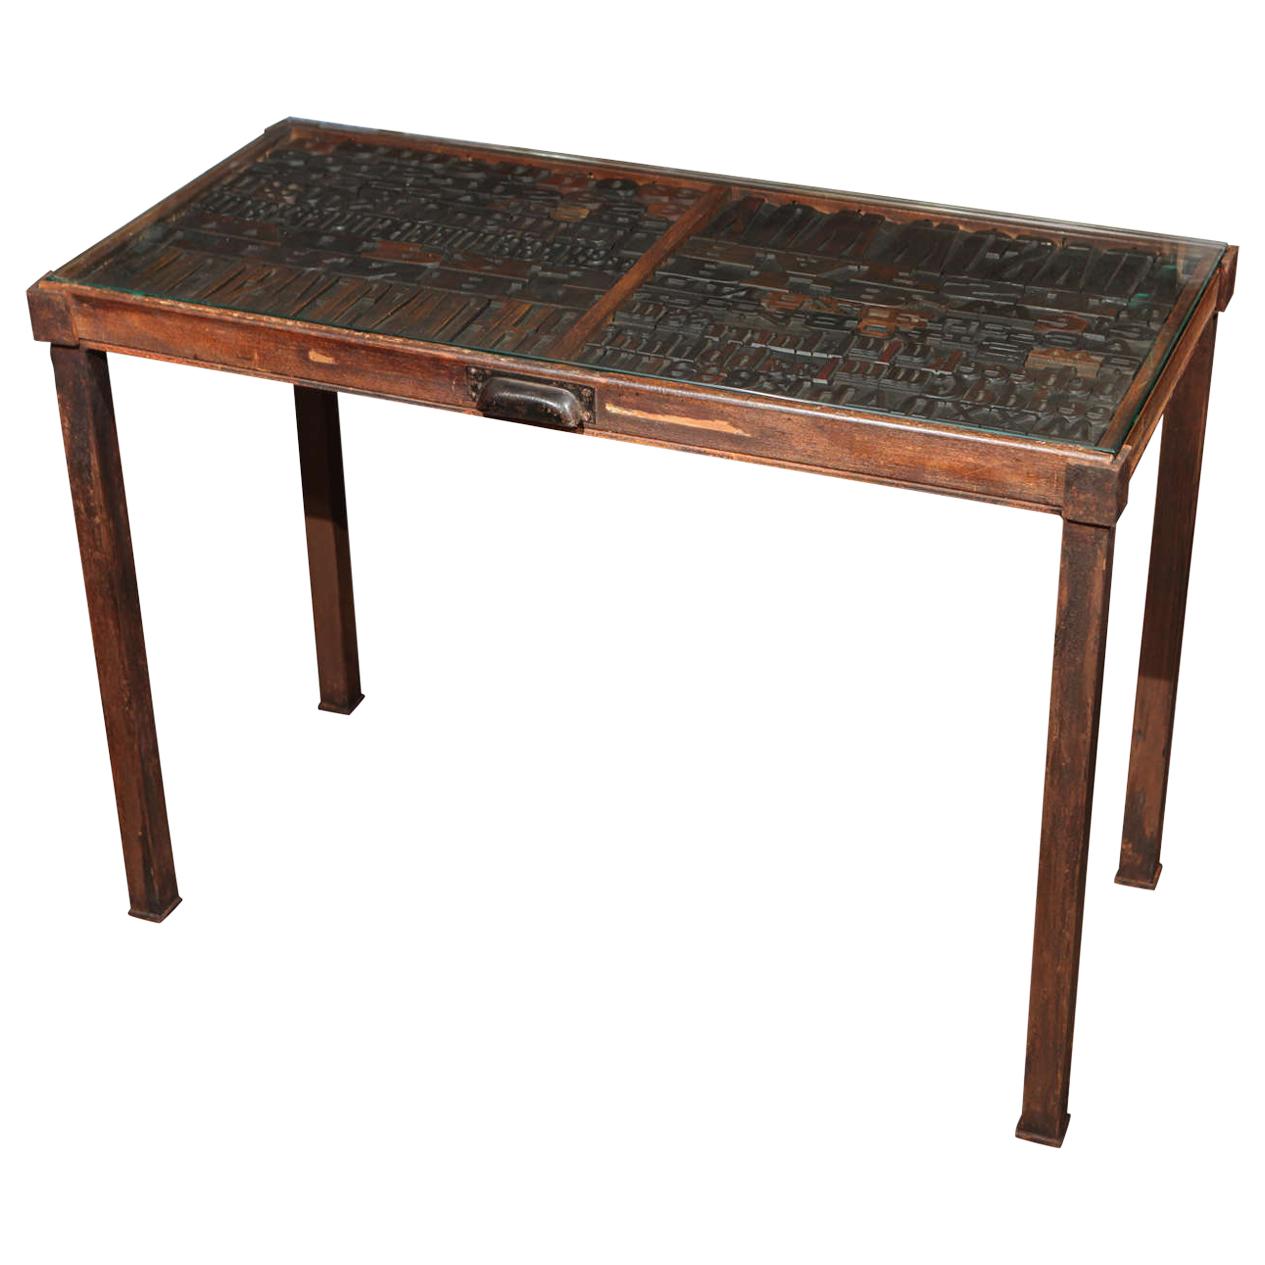 19th Century Antique Drawer Set in a Contemporary Iron Base with Glass Top For Sale